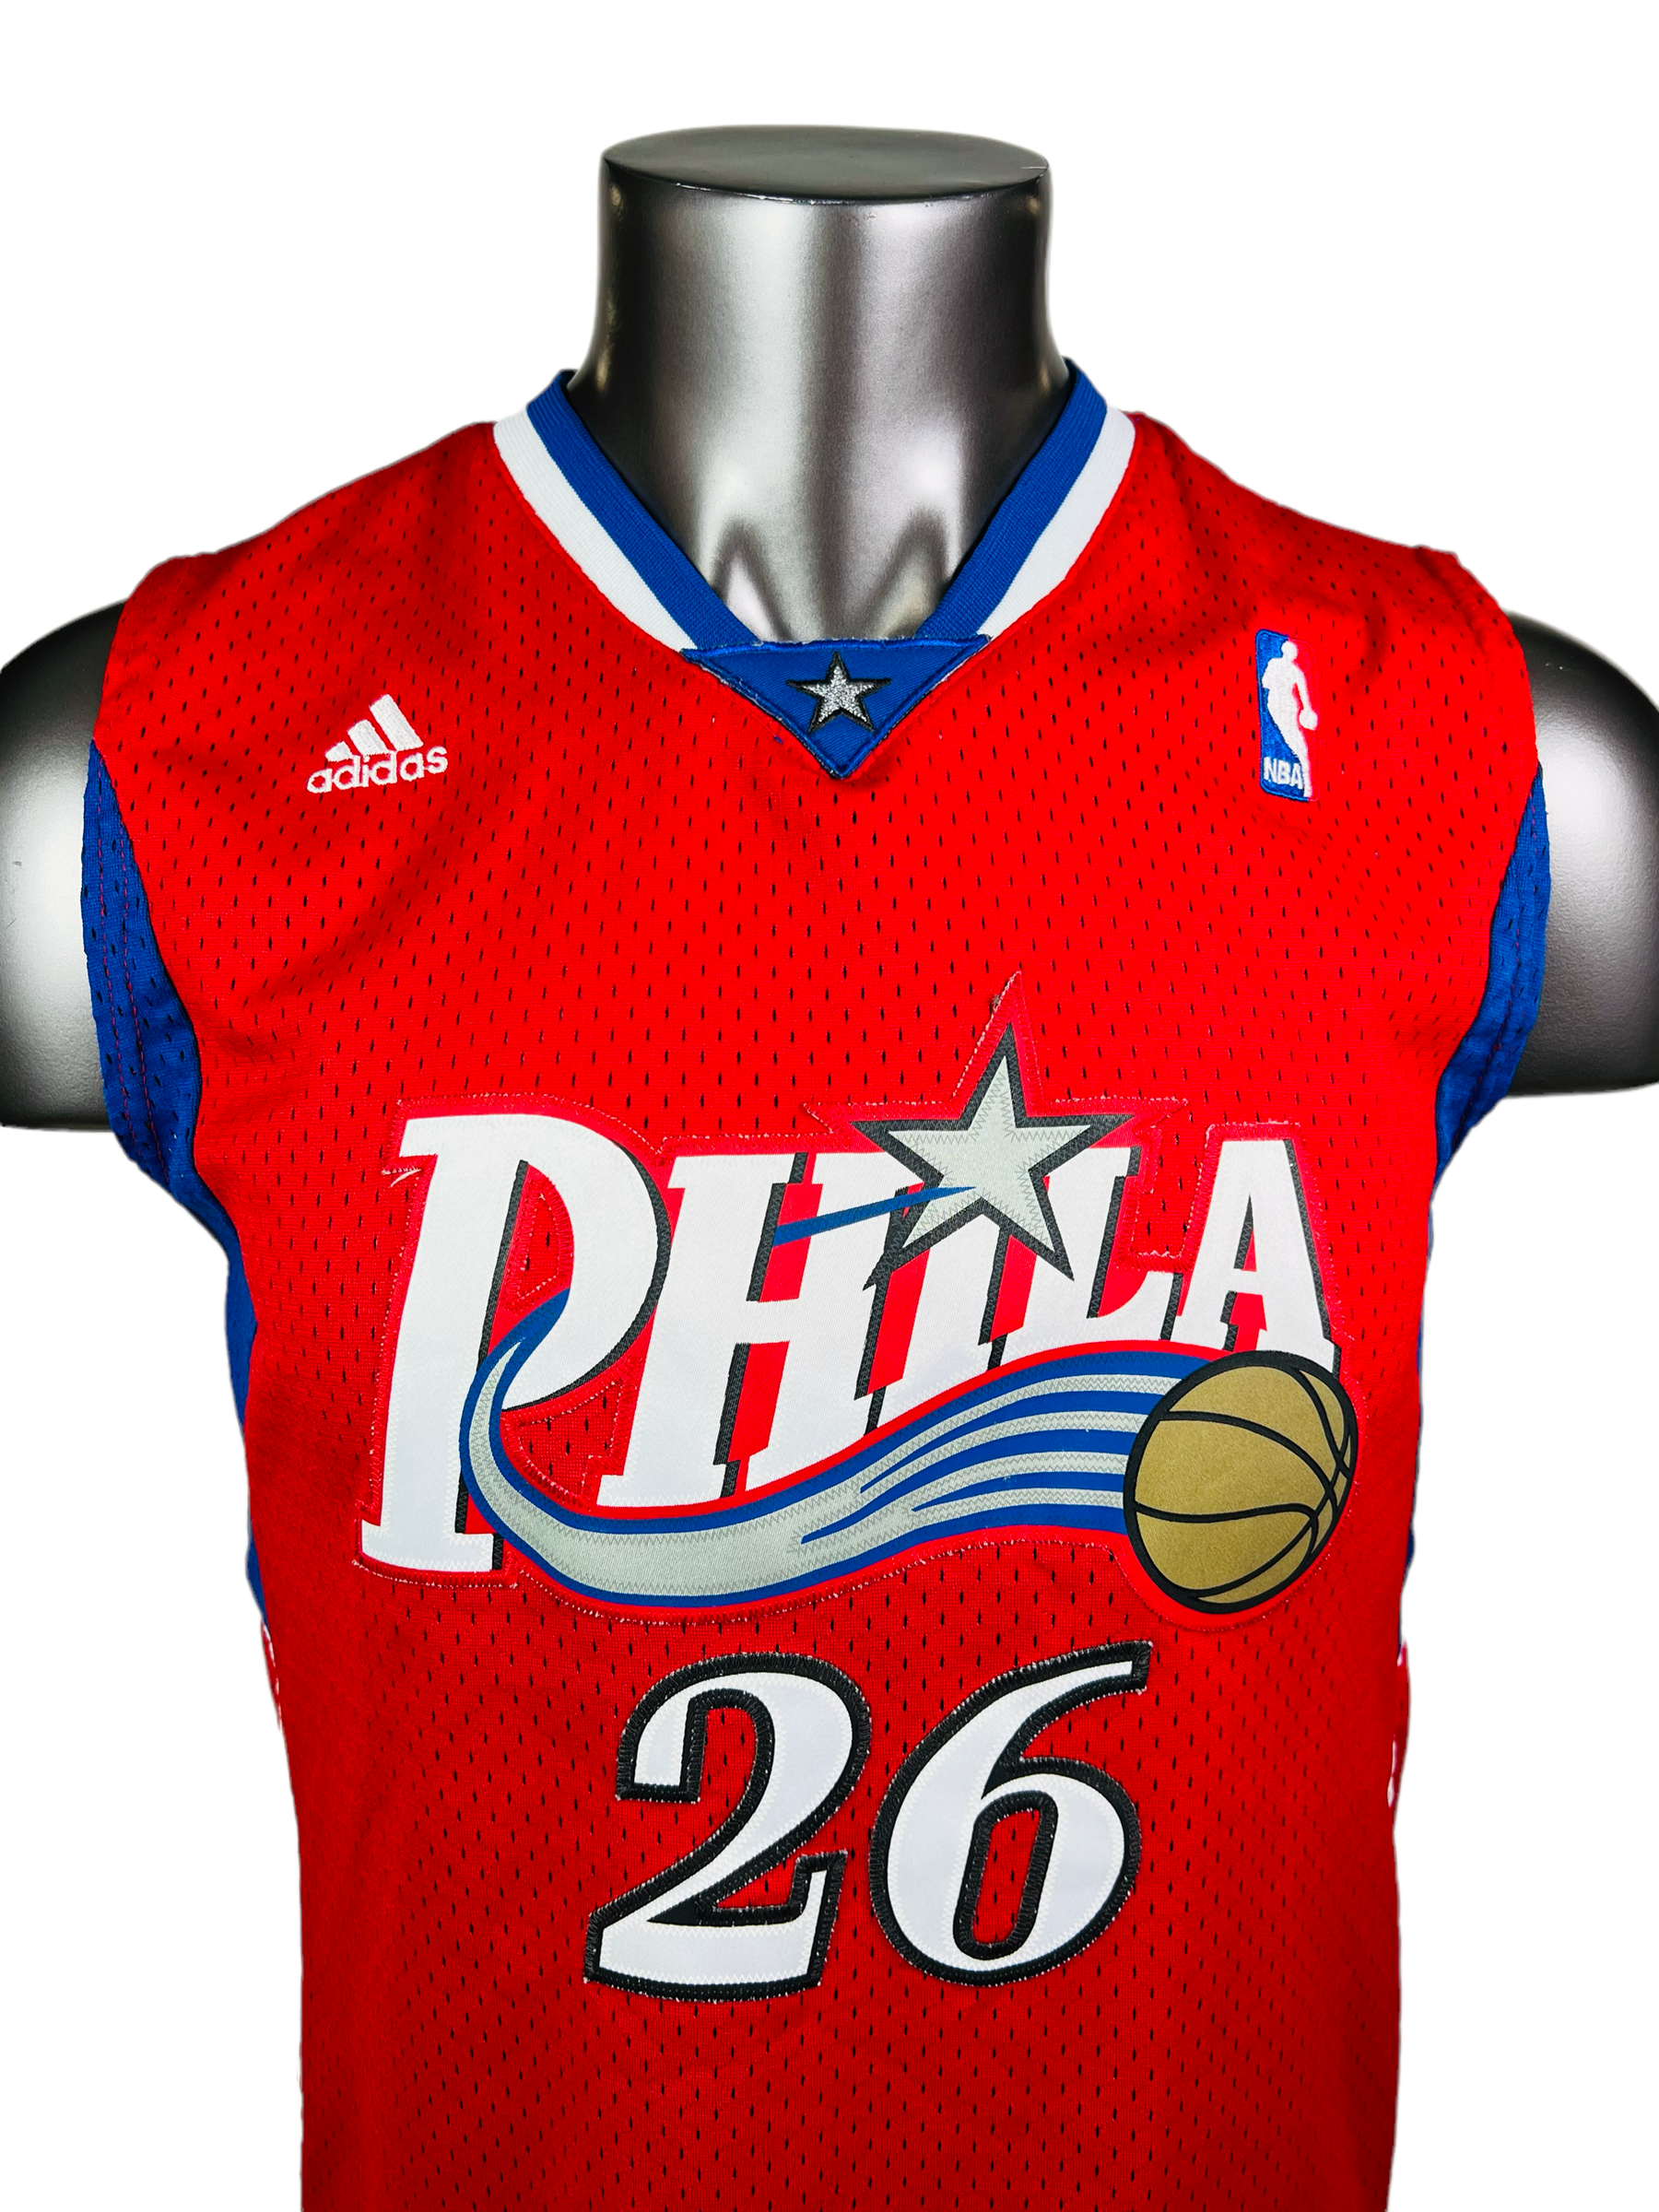 sixers classic edition jersey